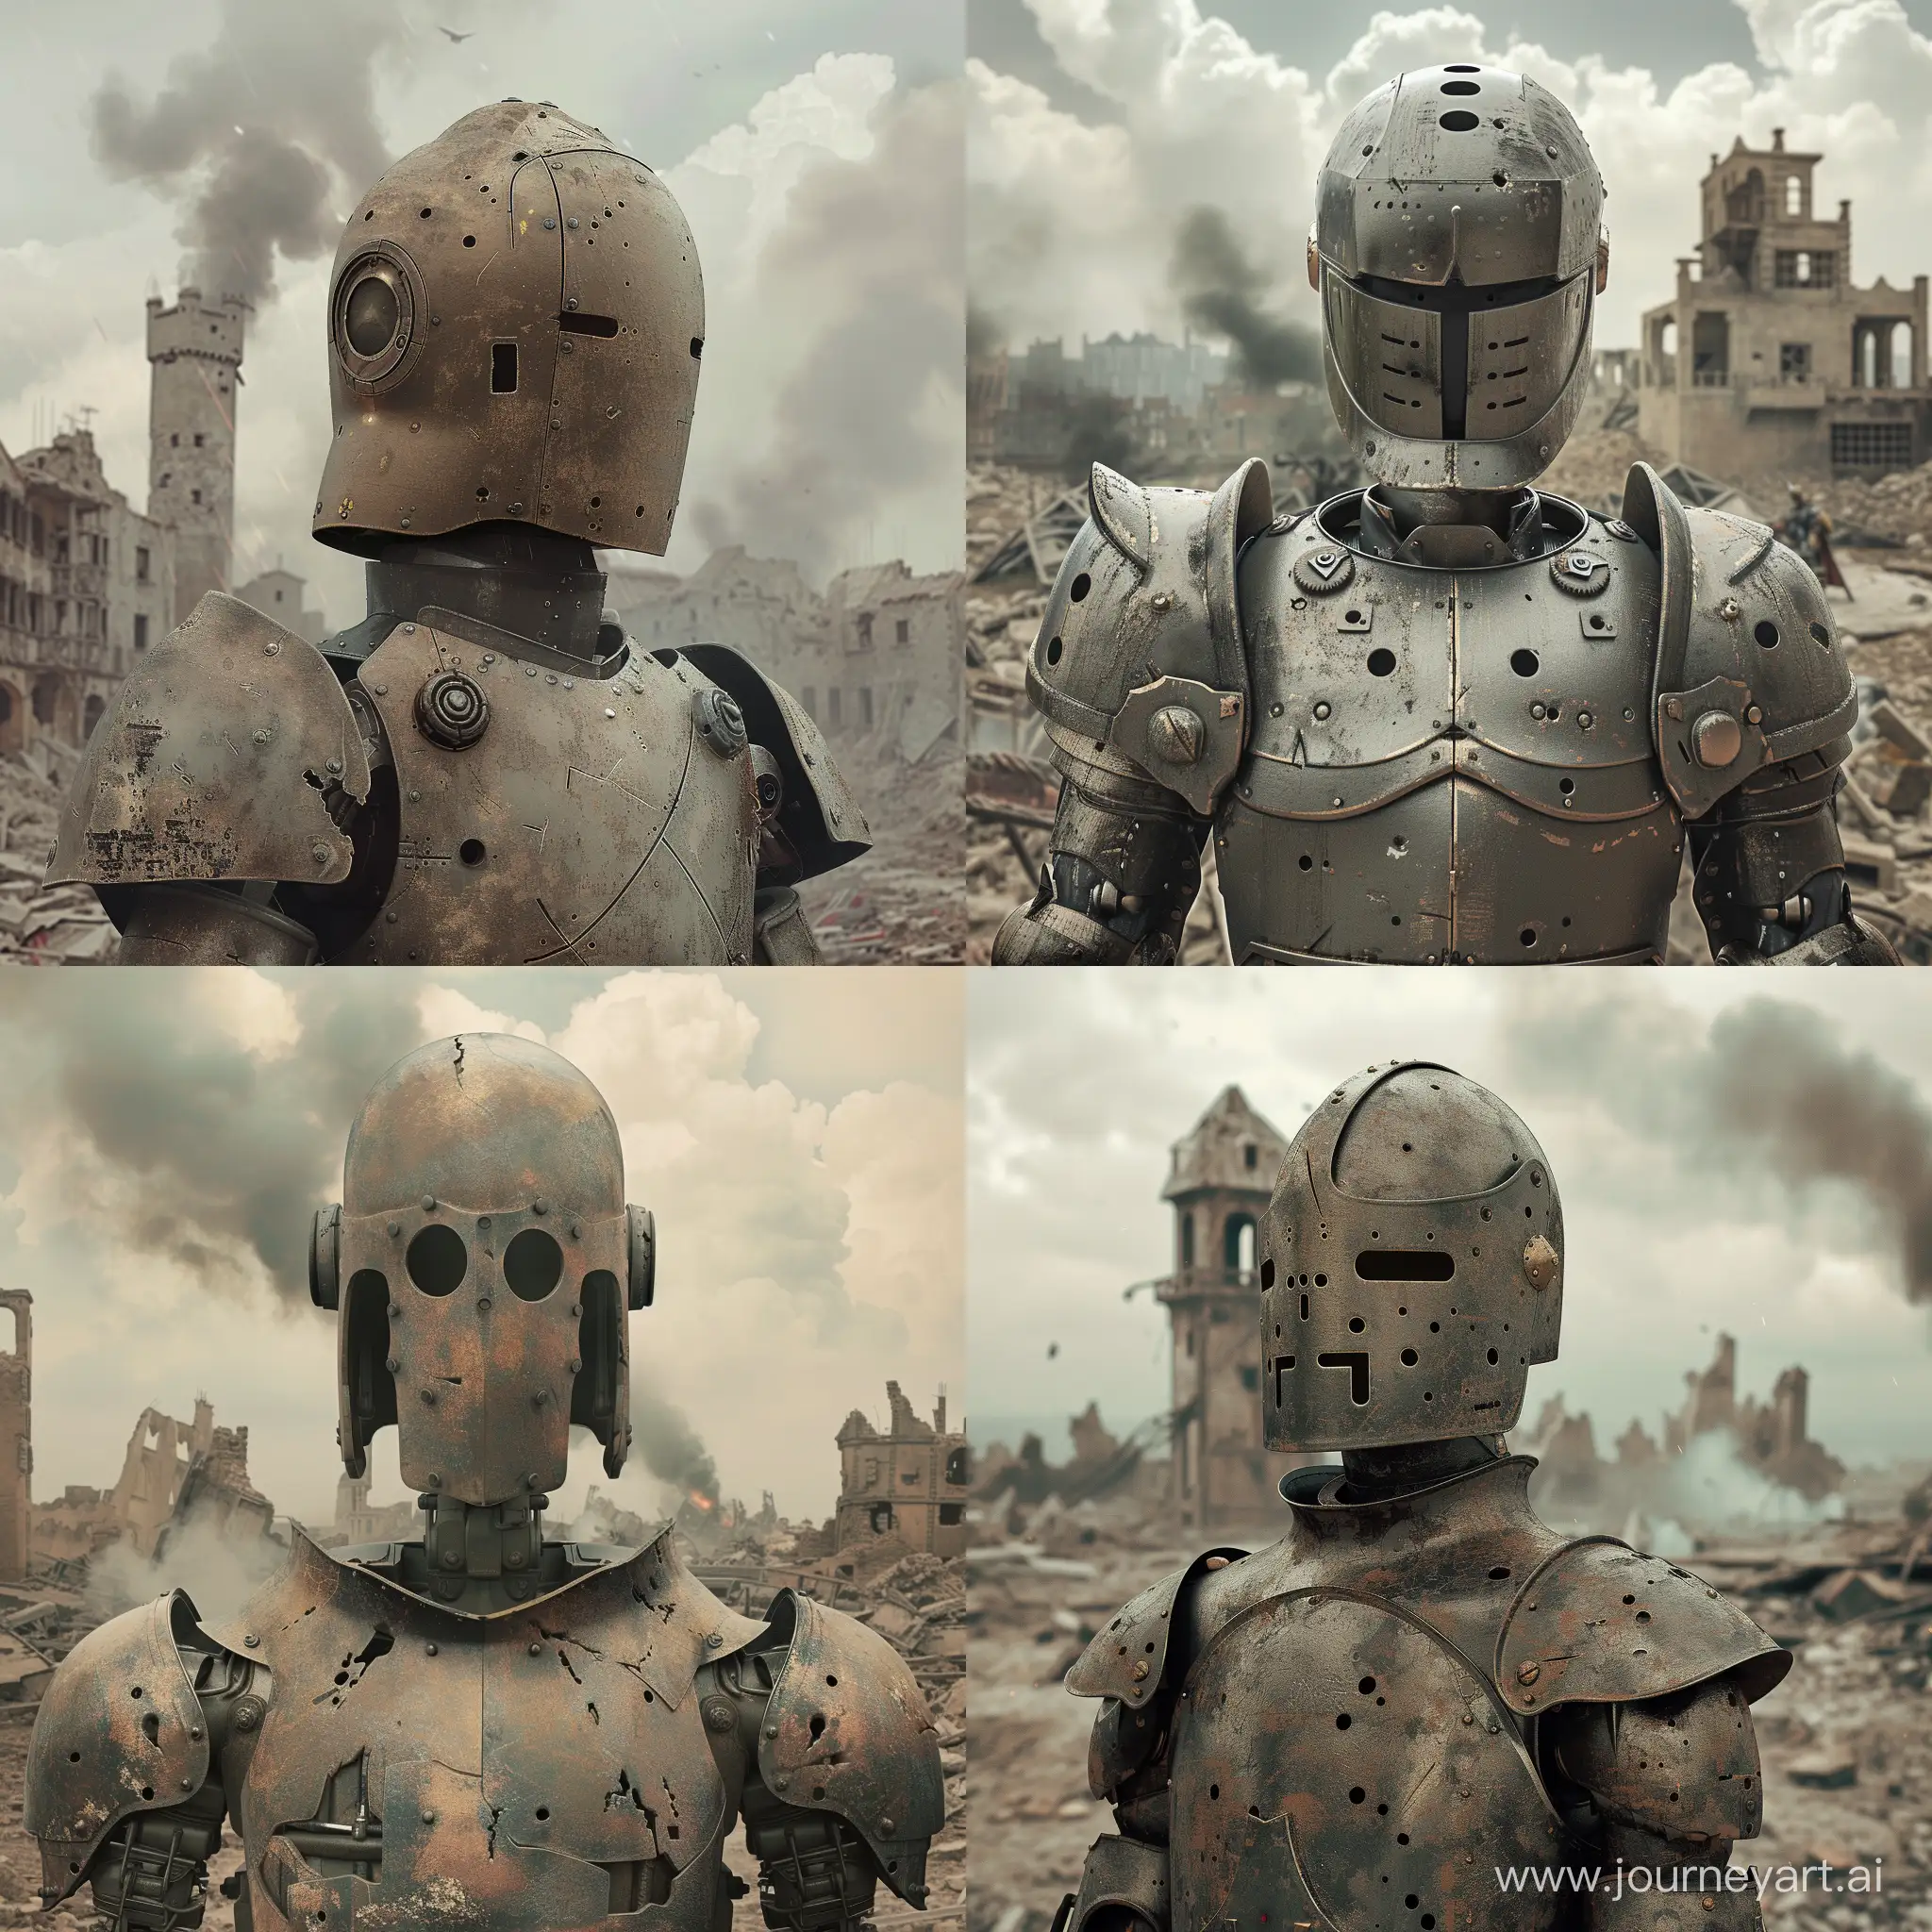 Steampunk-Medieval-Knight-Robot-in-Berserk-Anime-Style-amidst-a-Desolated-Cityscape